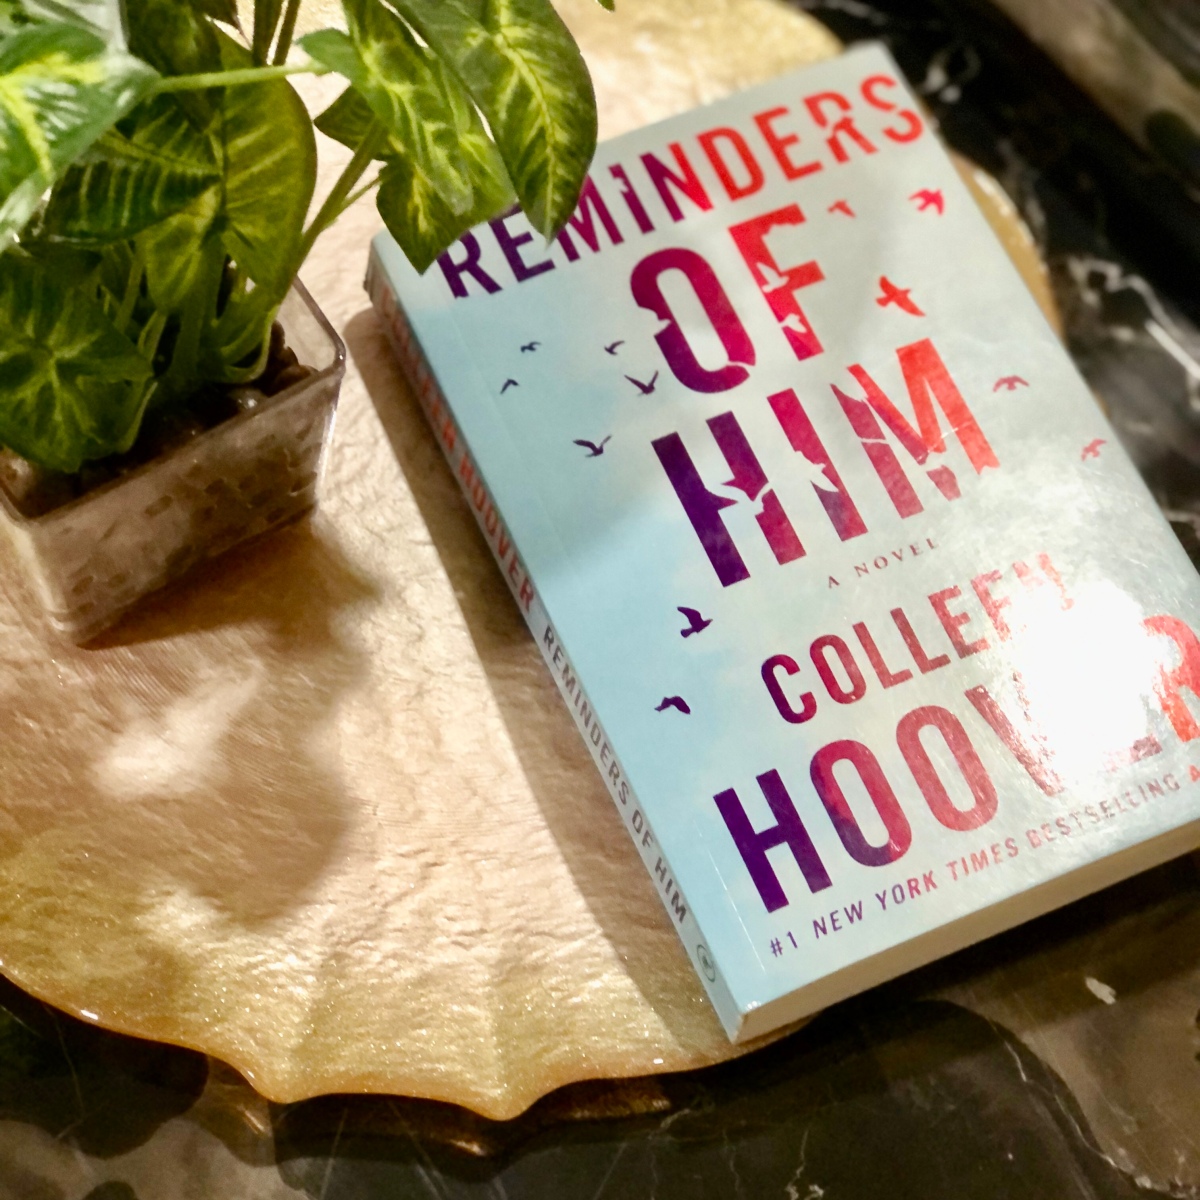 REMINDERS OF HIM by Colleen Hoover